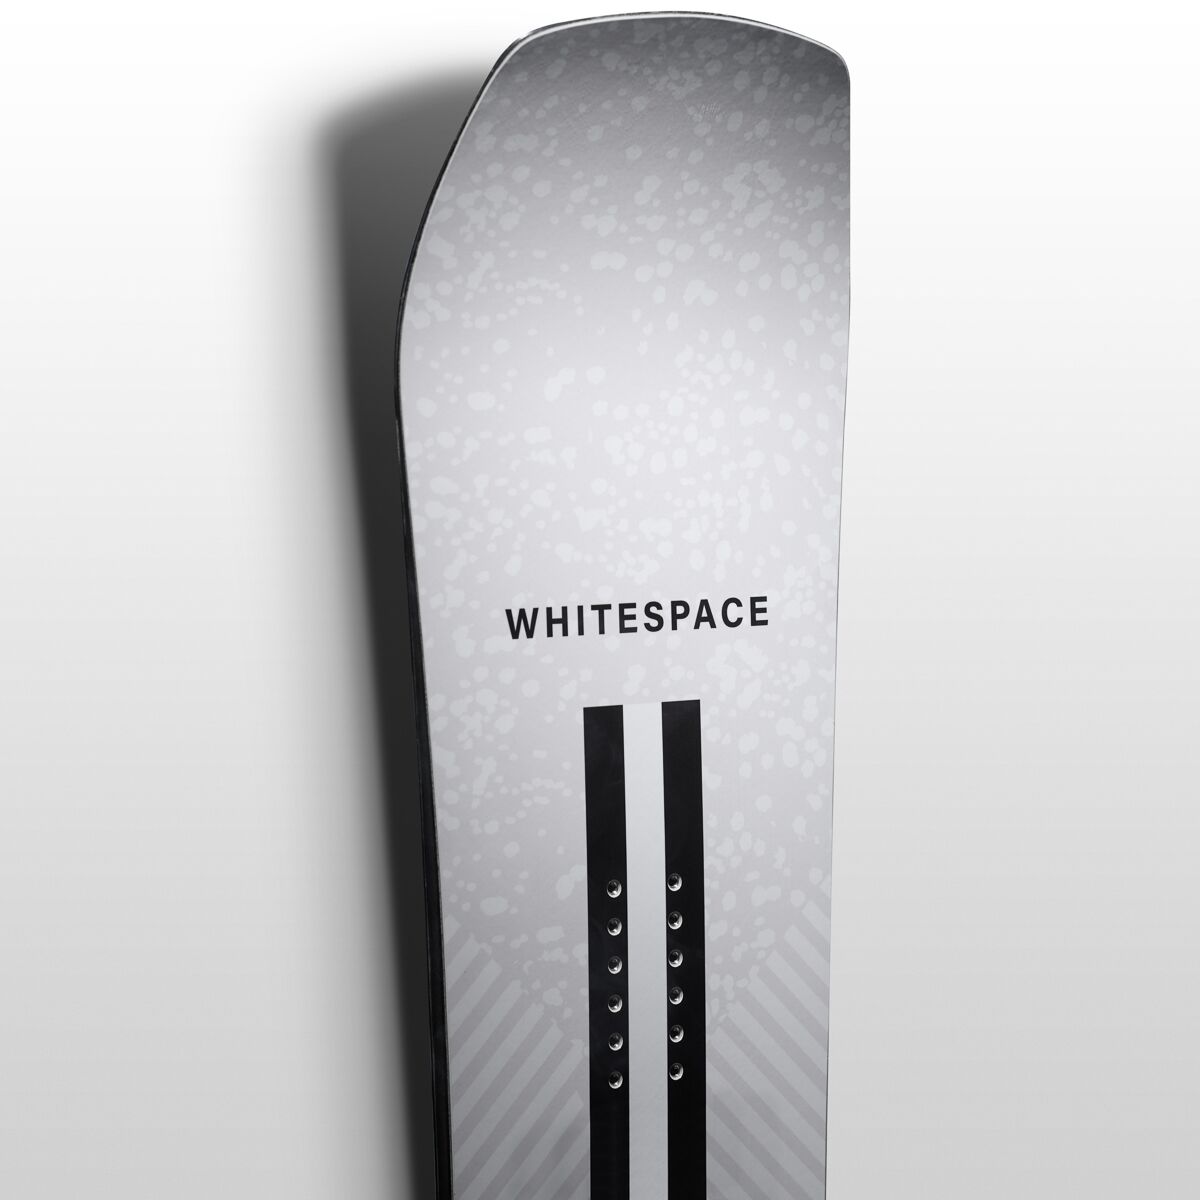 WHITESPACE Shaun White Pro - Limited Edition Autographed Snowboard